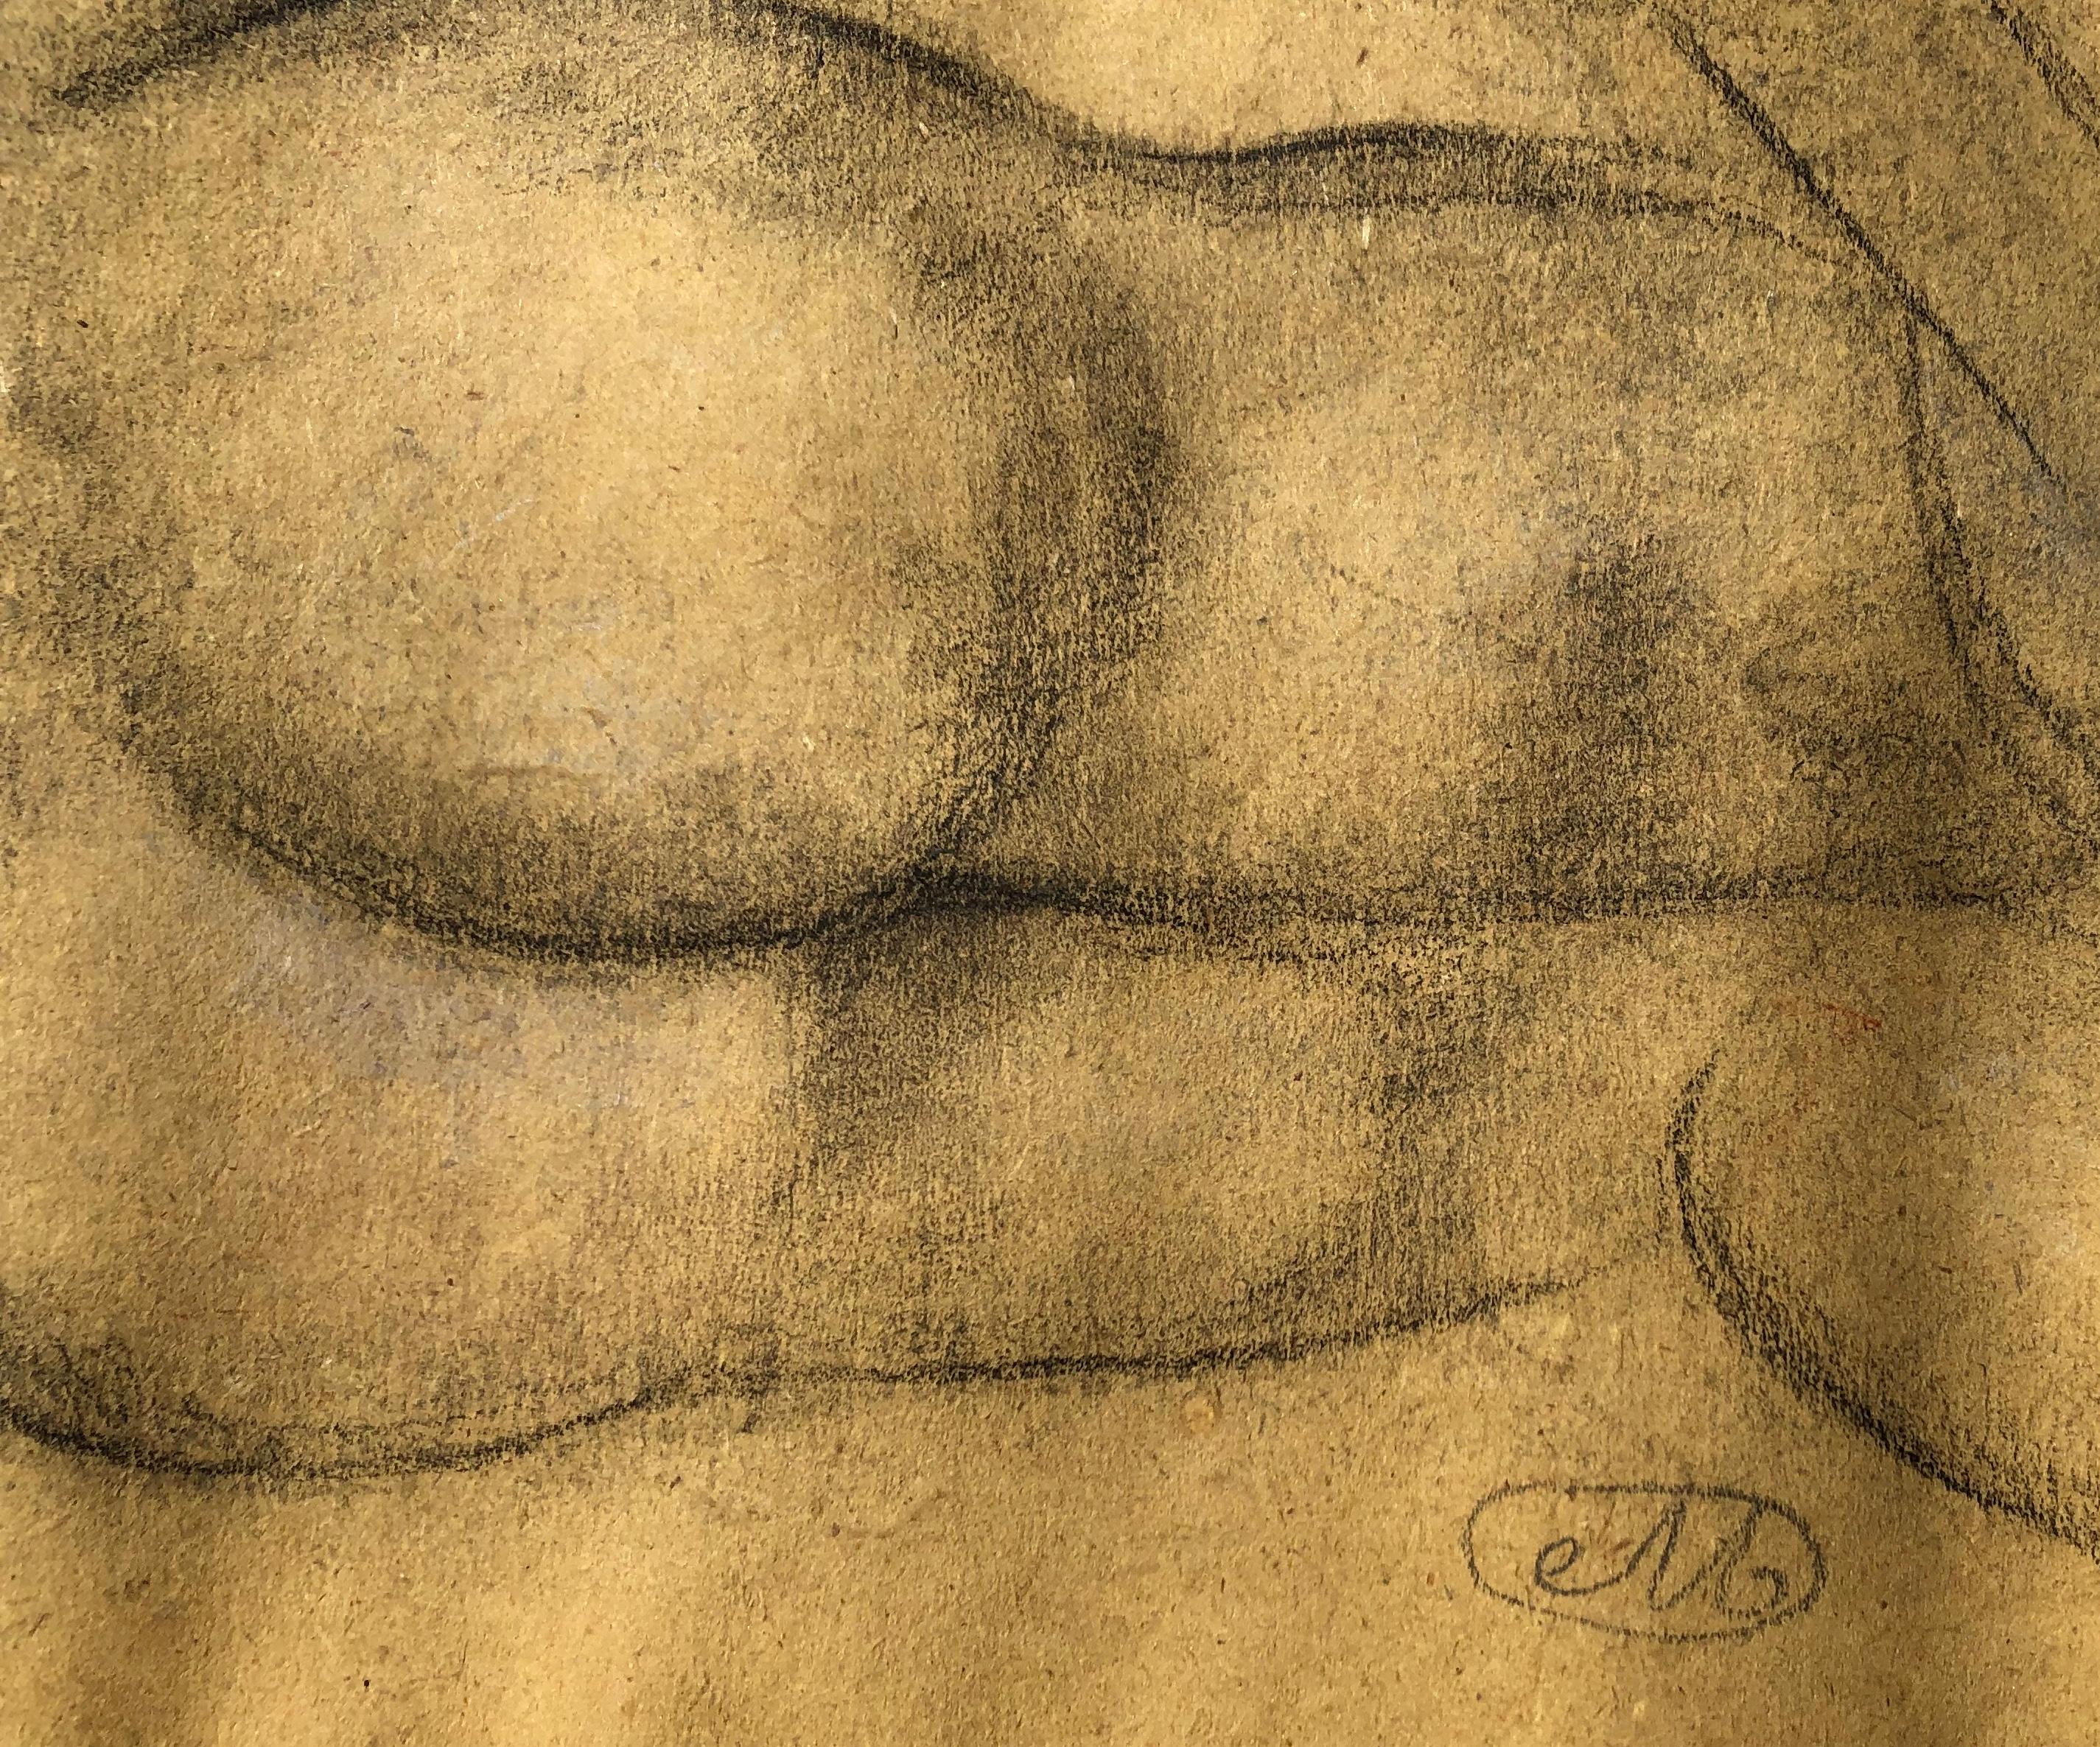 French Aristide Maillol Charcoal Drawing “Nu De Dos” 